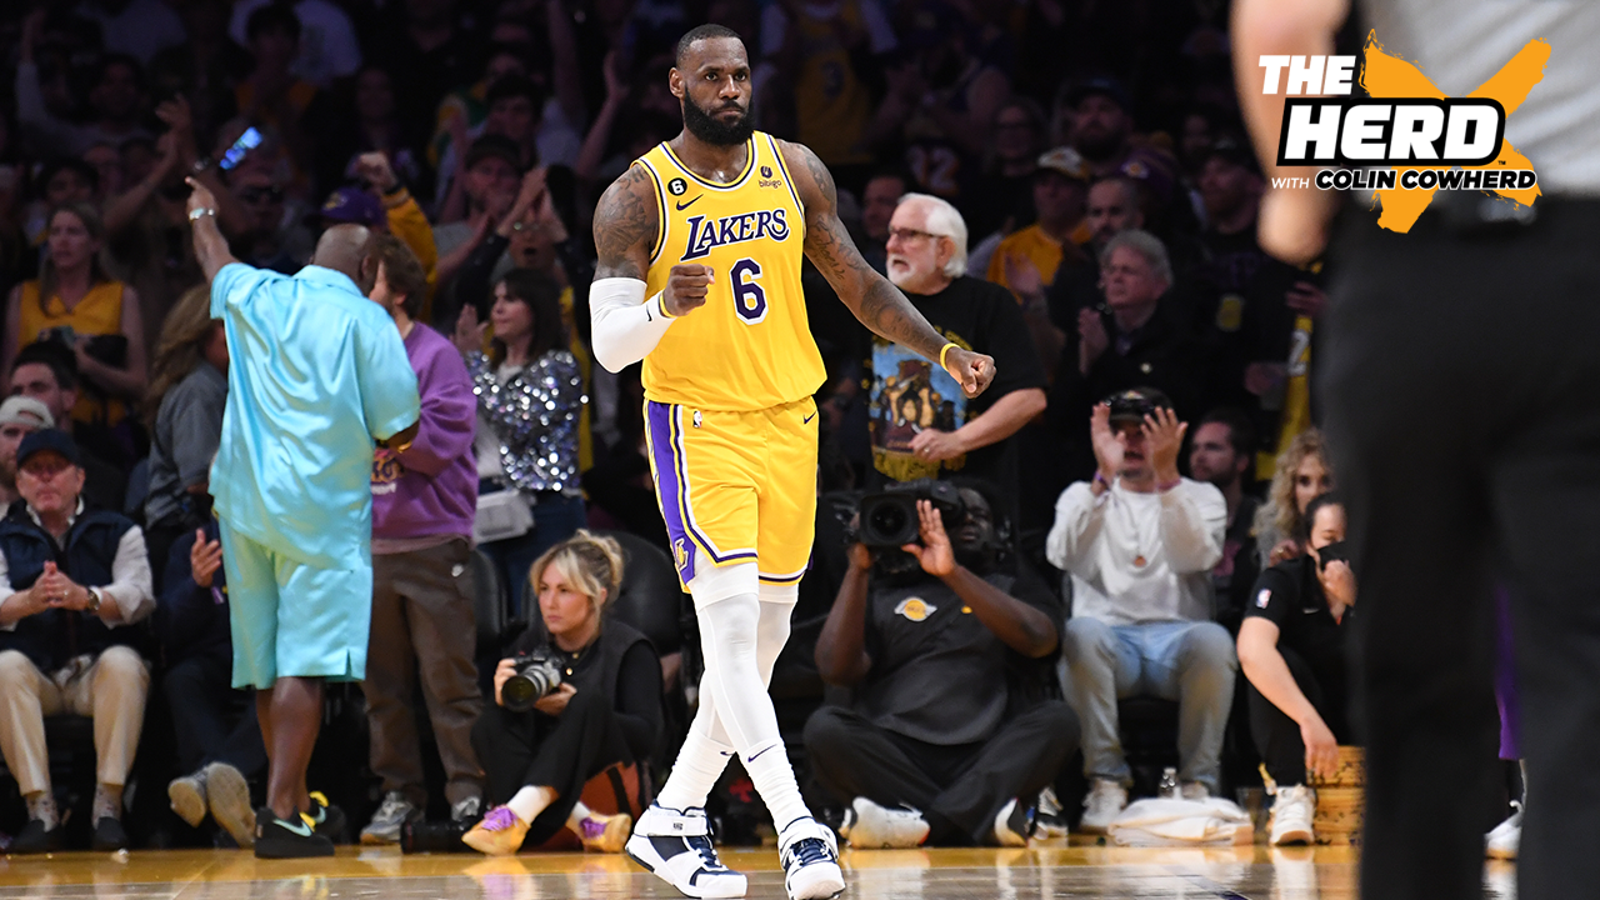 LeBron and the Lakers advance to the Western Conference finals